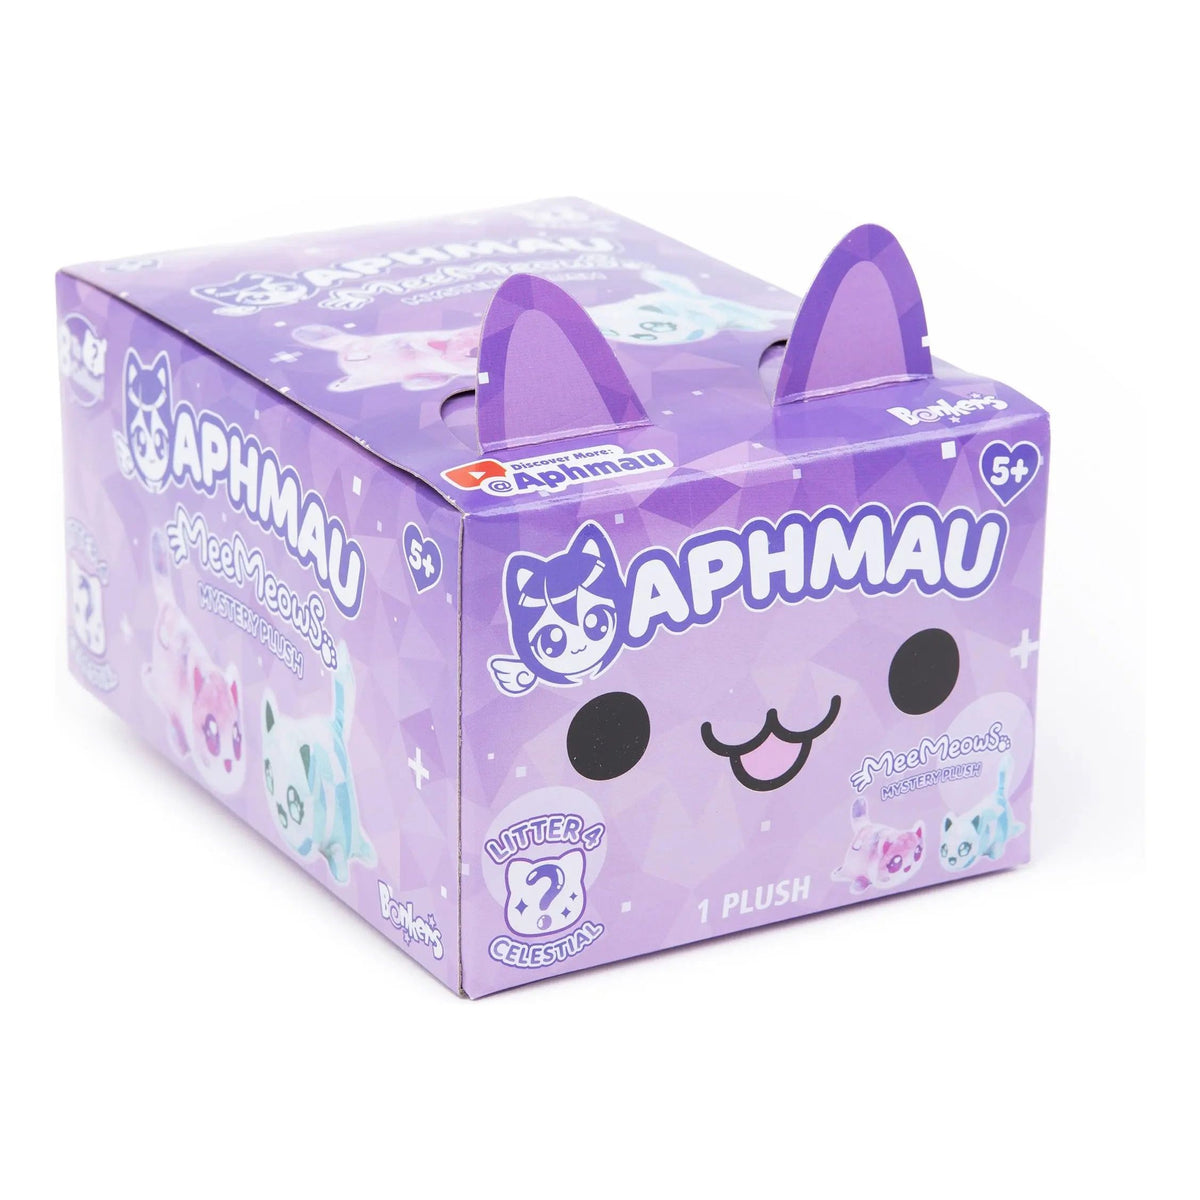 SAPPHIRE CAT - MeeMeows Litter 4 from Aphmau (BRAND NEW) Cute Kitty Plushie!